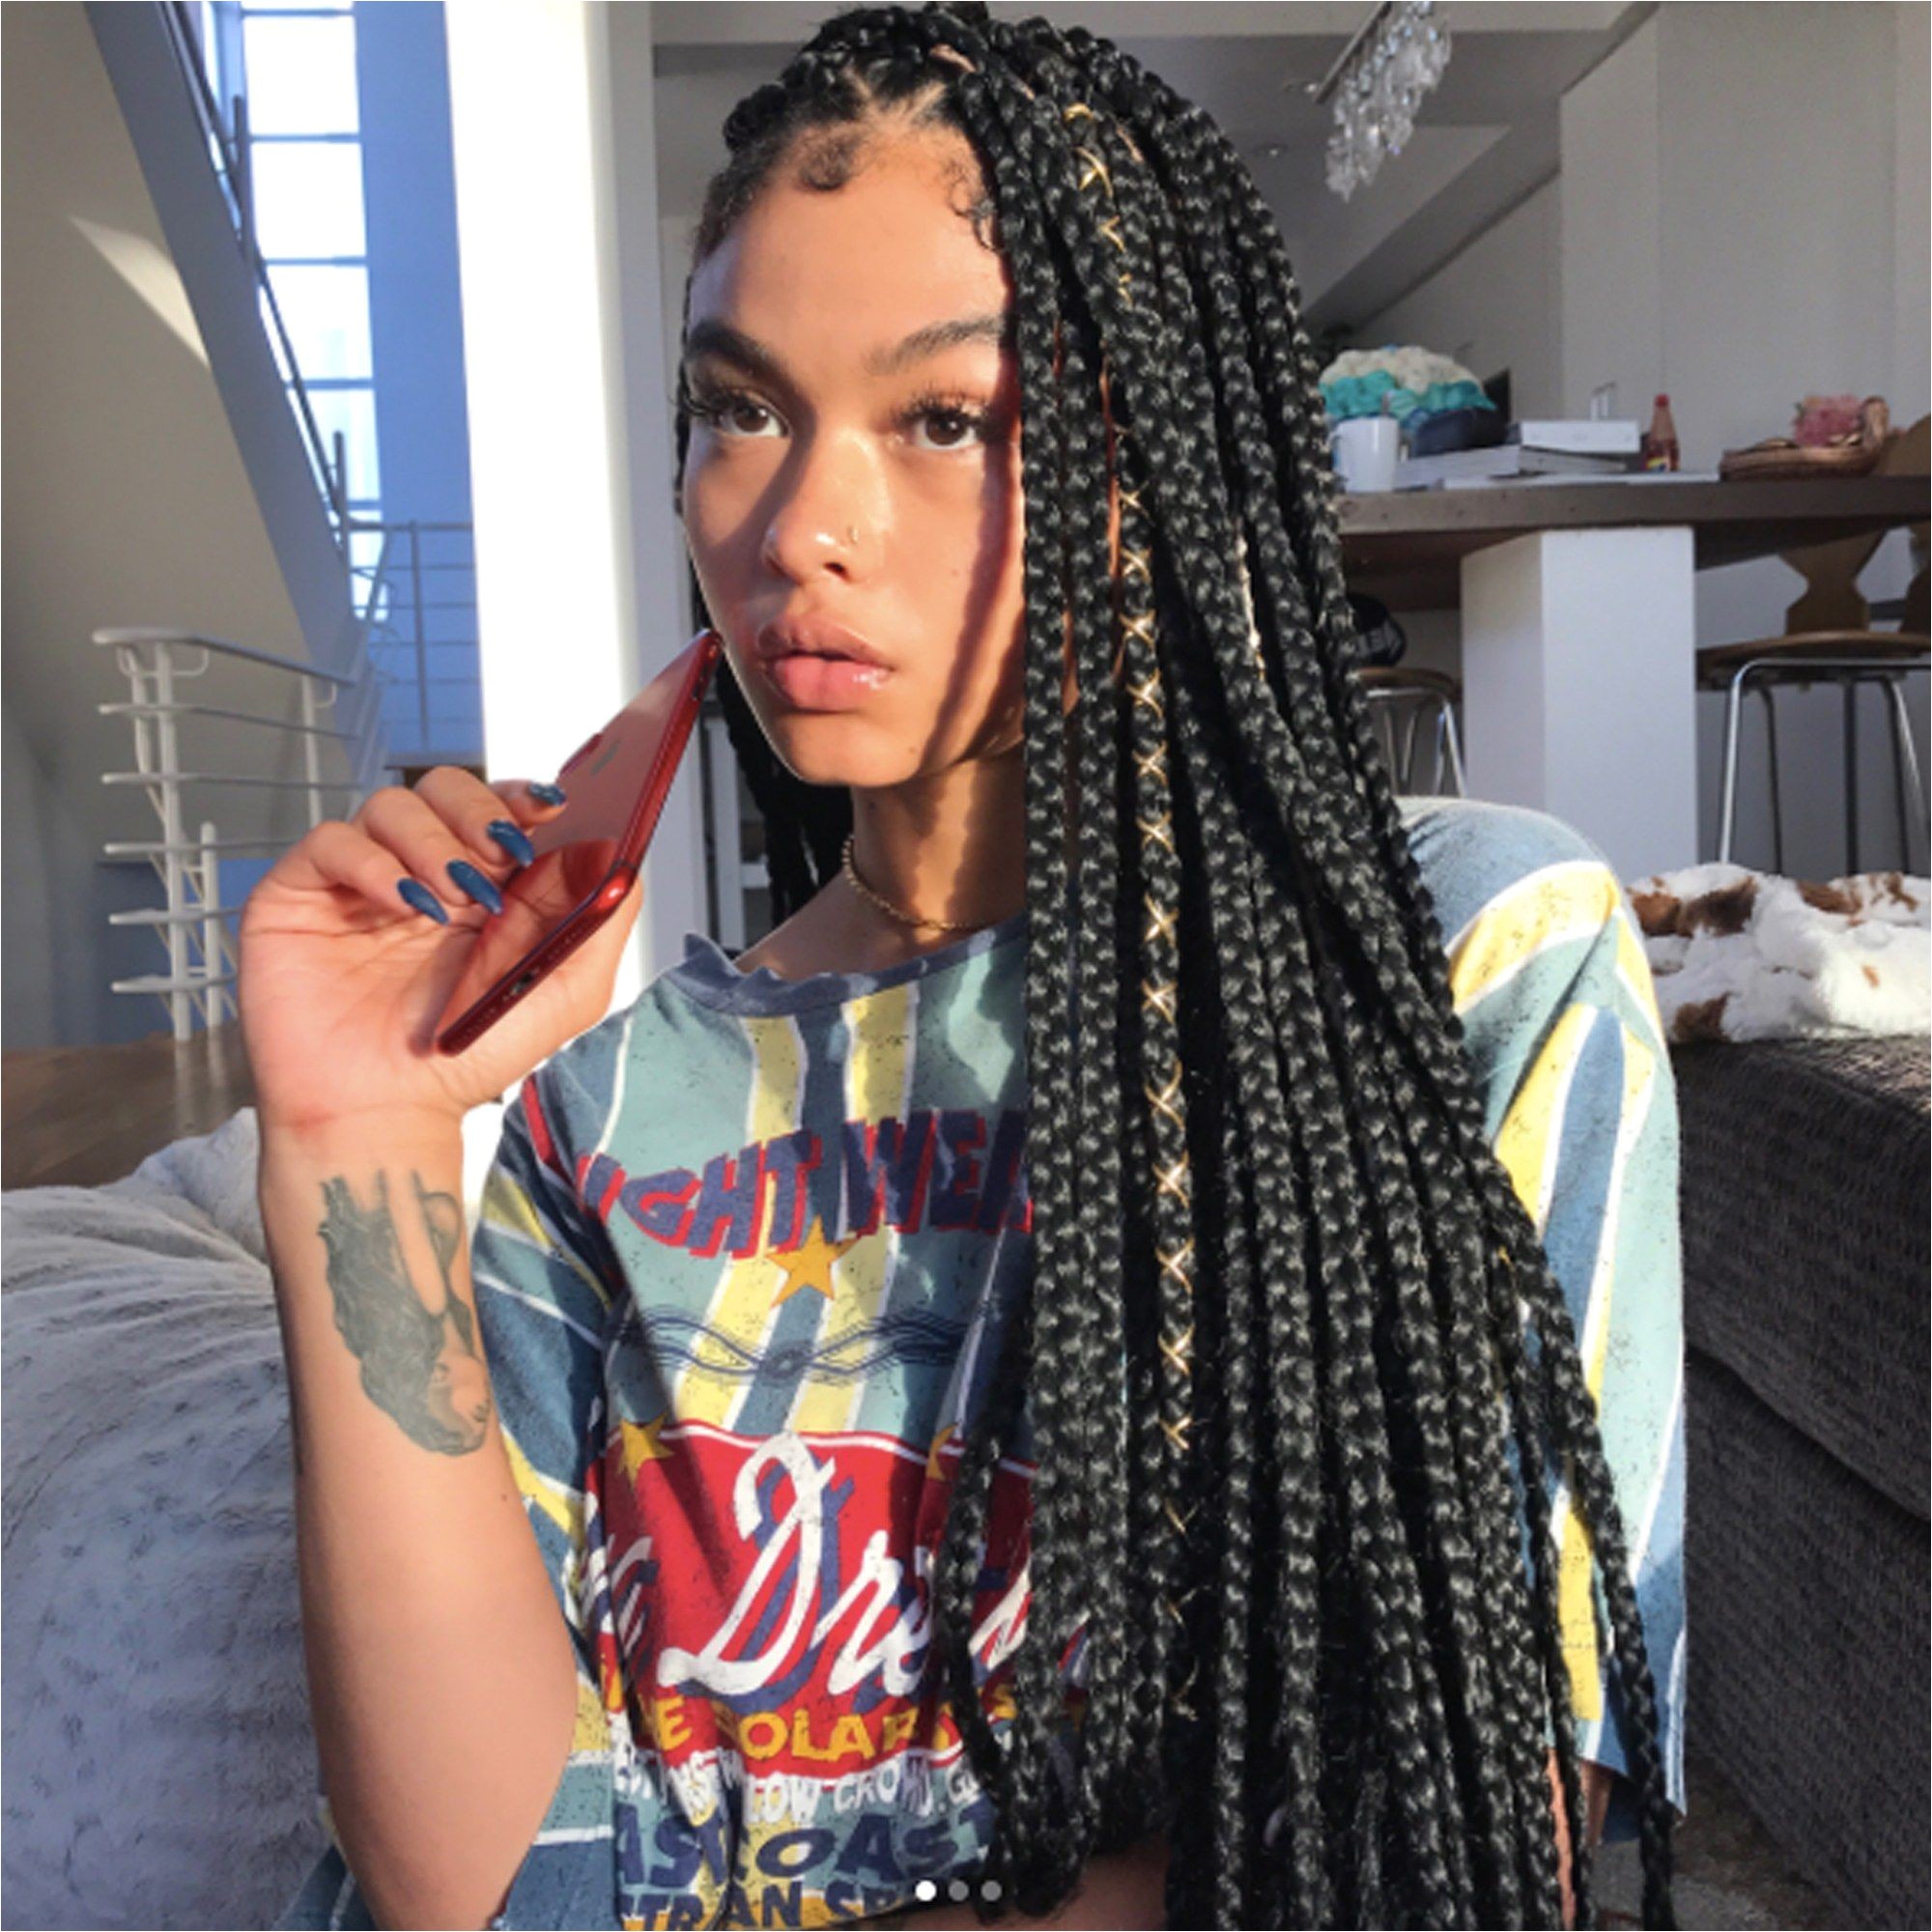 9 Hairstyles Anyone With Box Braids Needs to Try